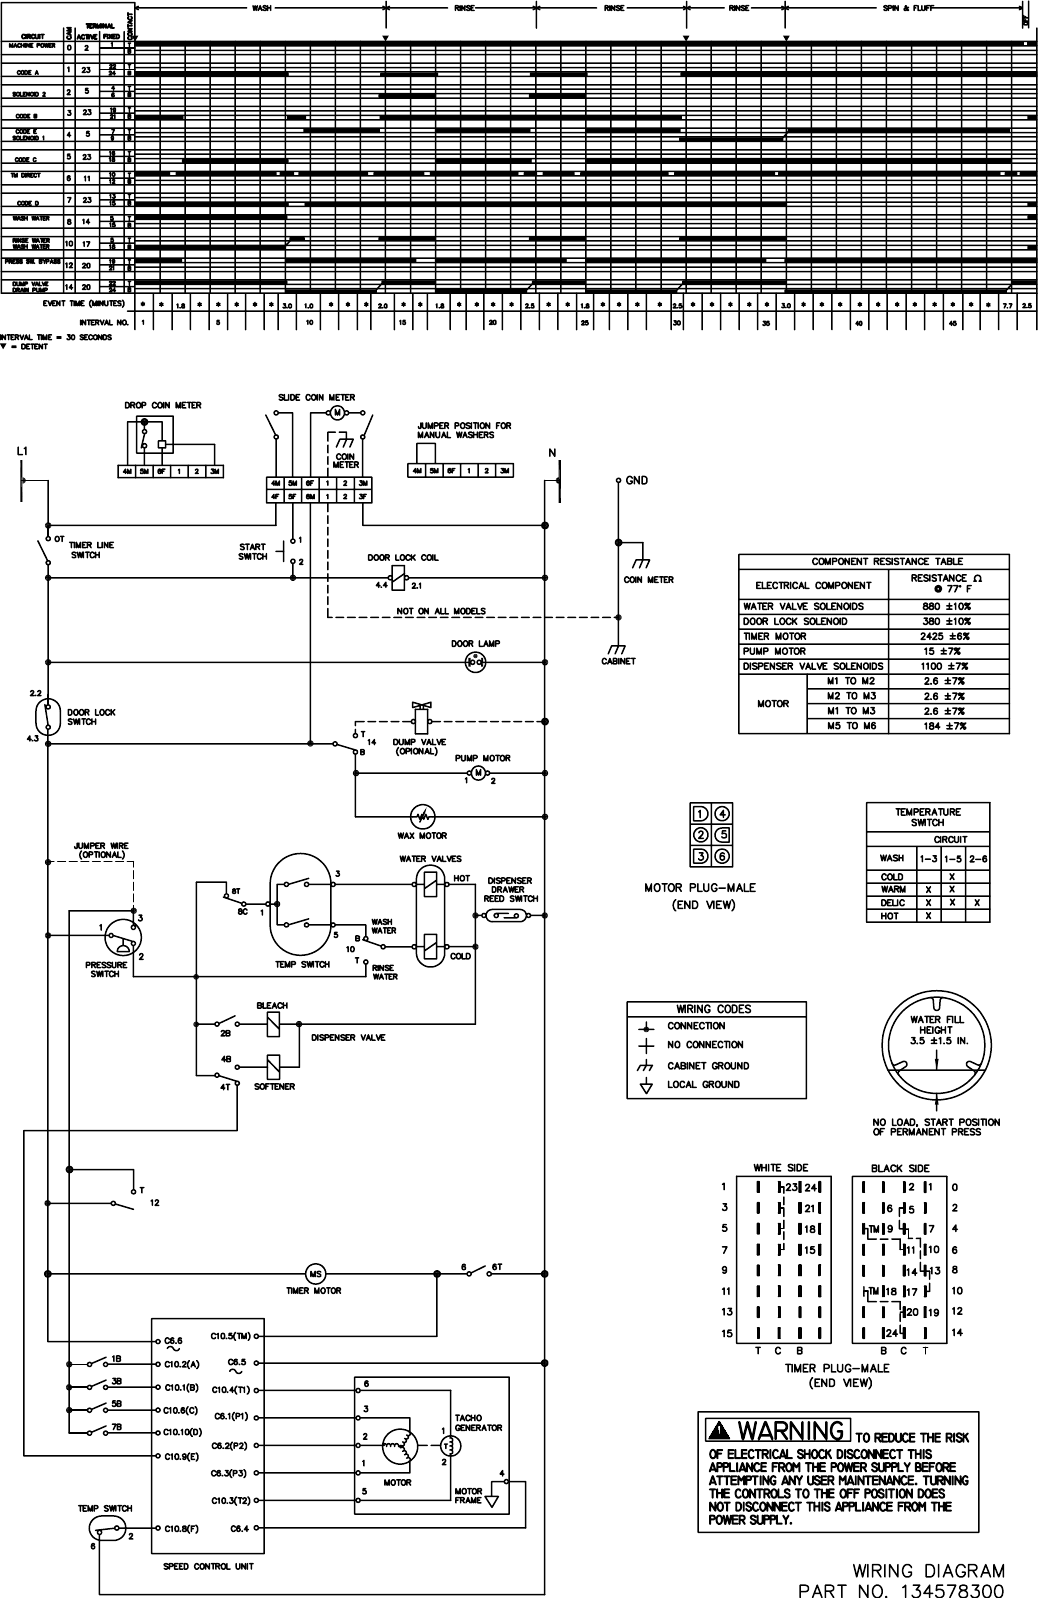 Page 1 of 4 - Kenmore Front Load Washer Wiring Sheet 417.24182301